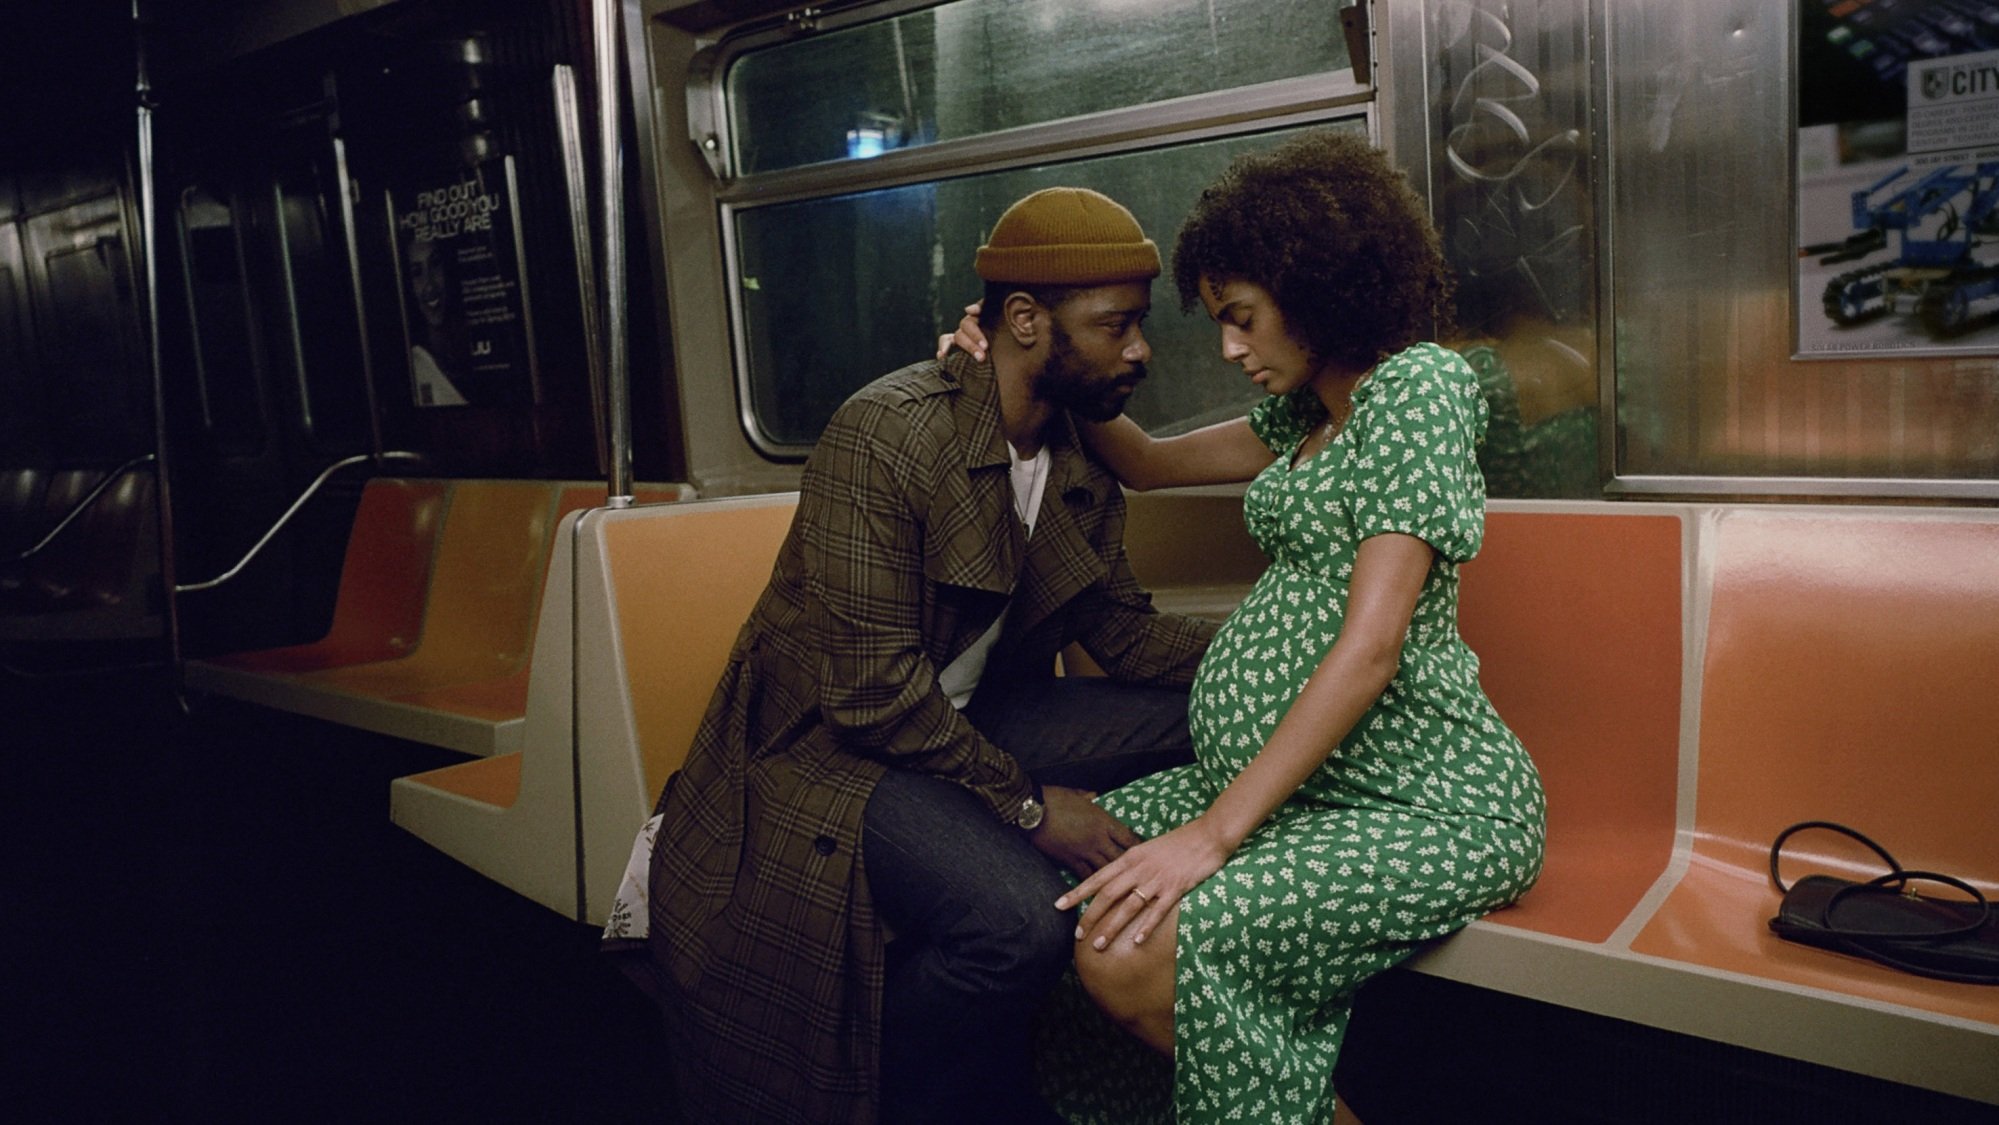 A man and a pregnant woman sitting in a subway car.